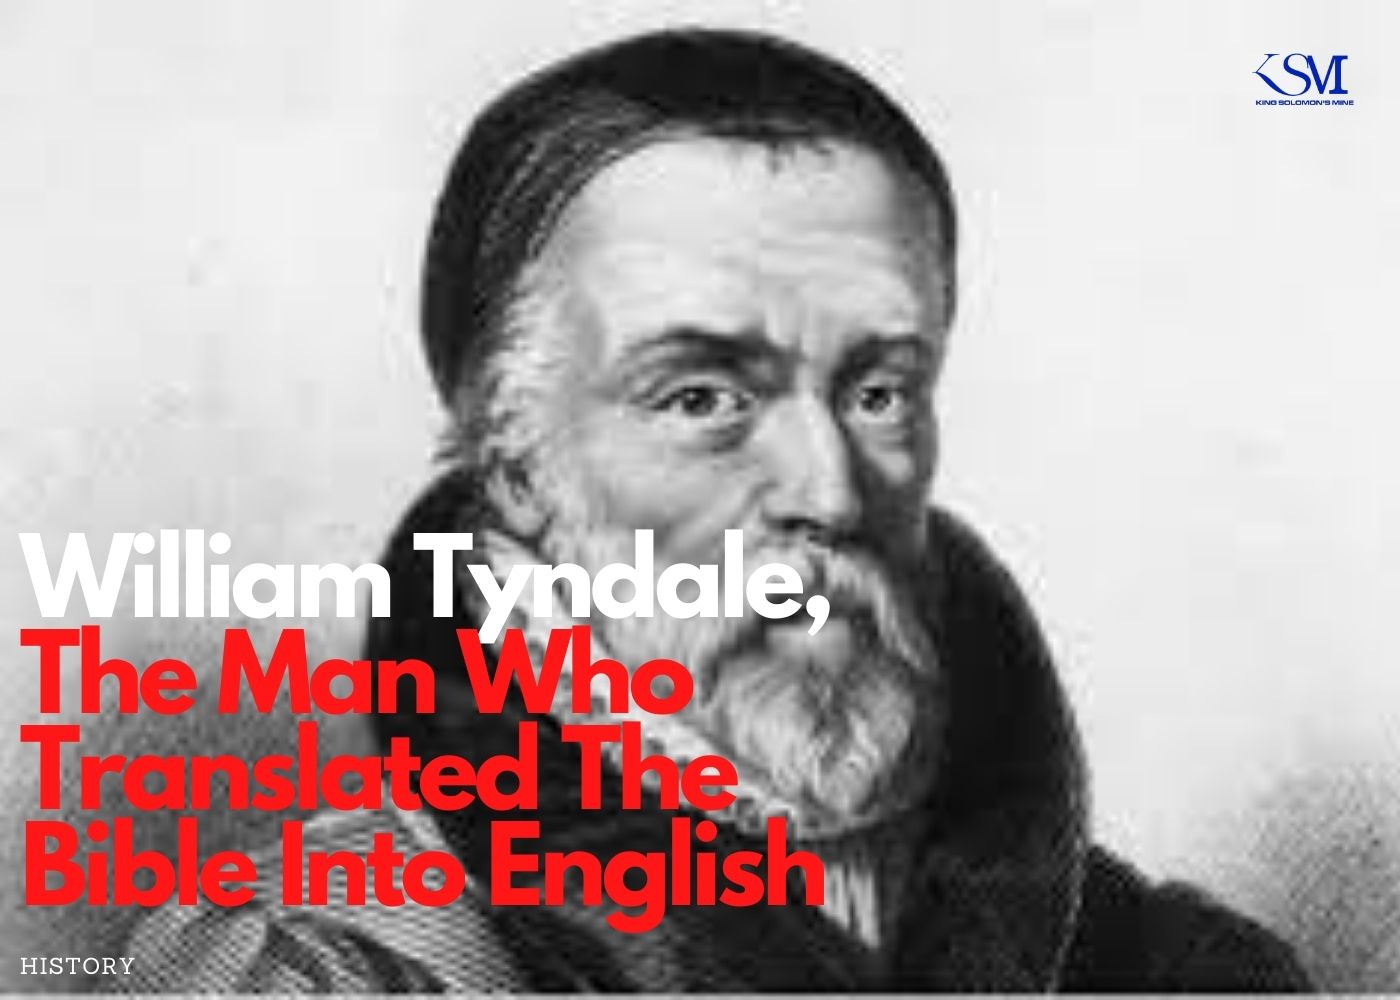 William Tyndale, The Man Who Translated The Bible Into English